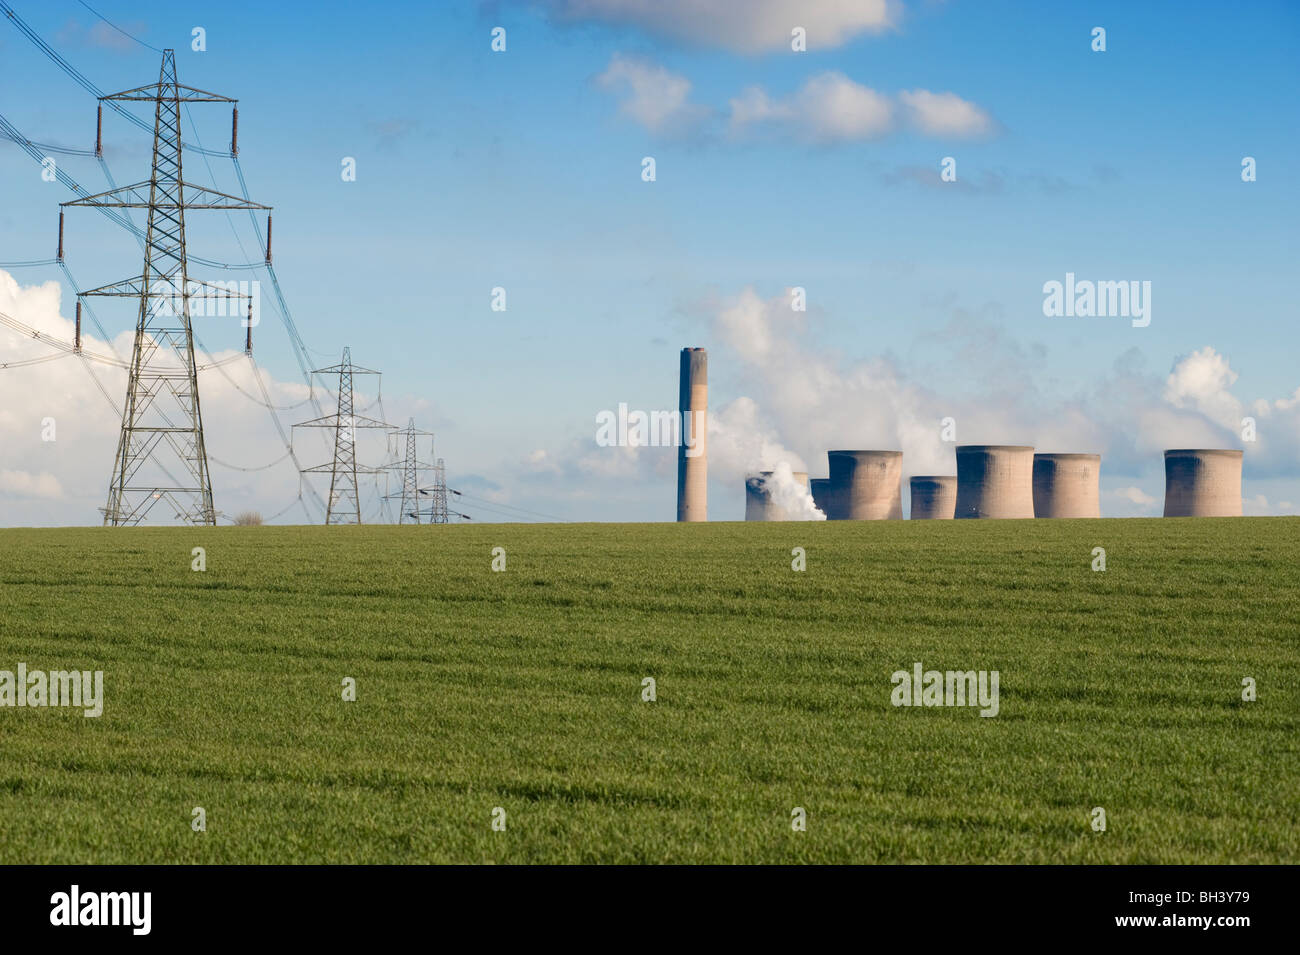 Fiddlers Ferry Electricity generating plant on Merseyside, Near Liverpool in the UK. Stock Photo